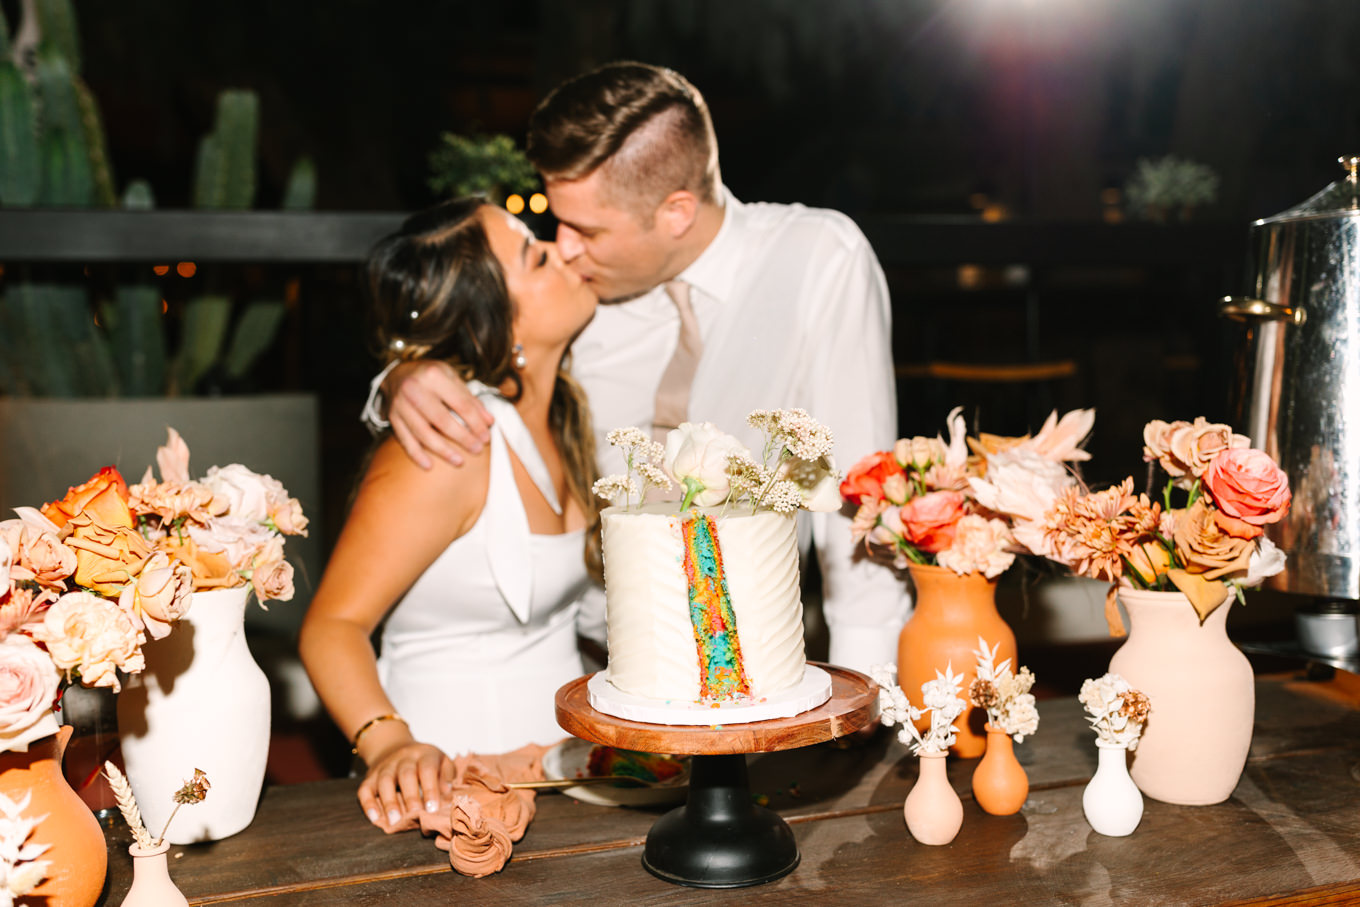 Rainbow surprise in wedding cake | Pink and orange Lautner Compound wedding | Colorful Palm Springs wedding photography | #palmspringsphotographer #palmspringswedding #lautnercompound #southerncaliforniawedding  Source: Mary Costa Photography | Los Angeles